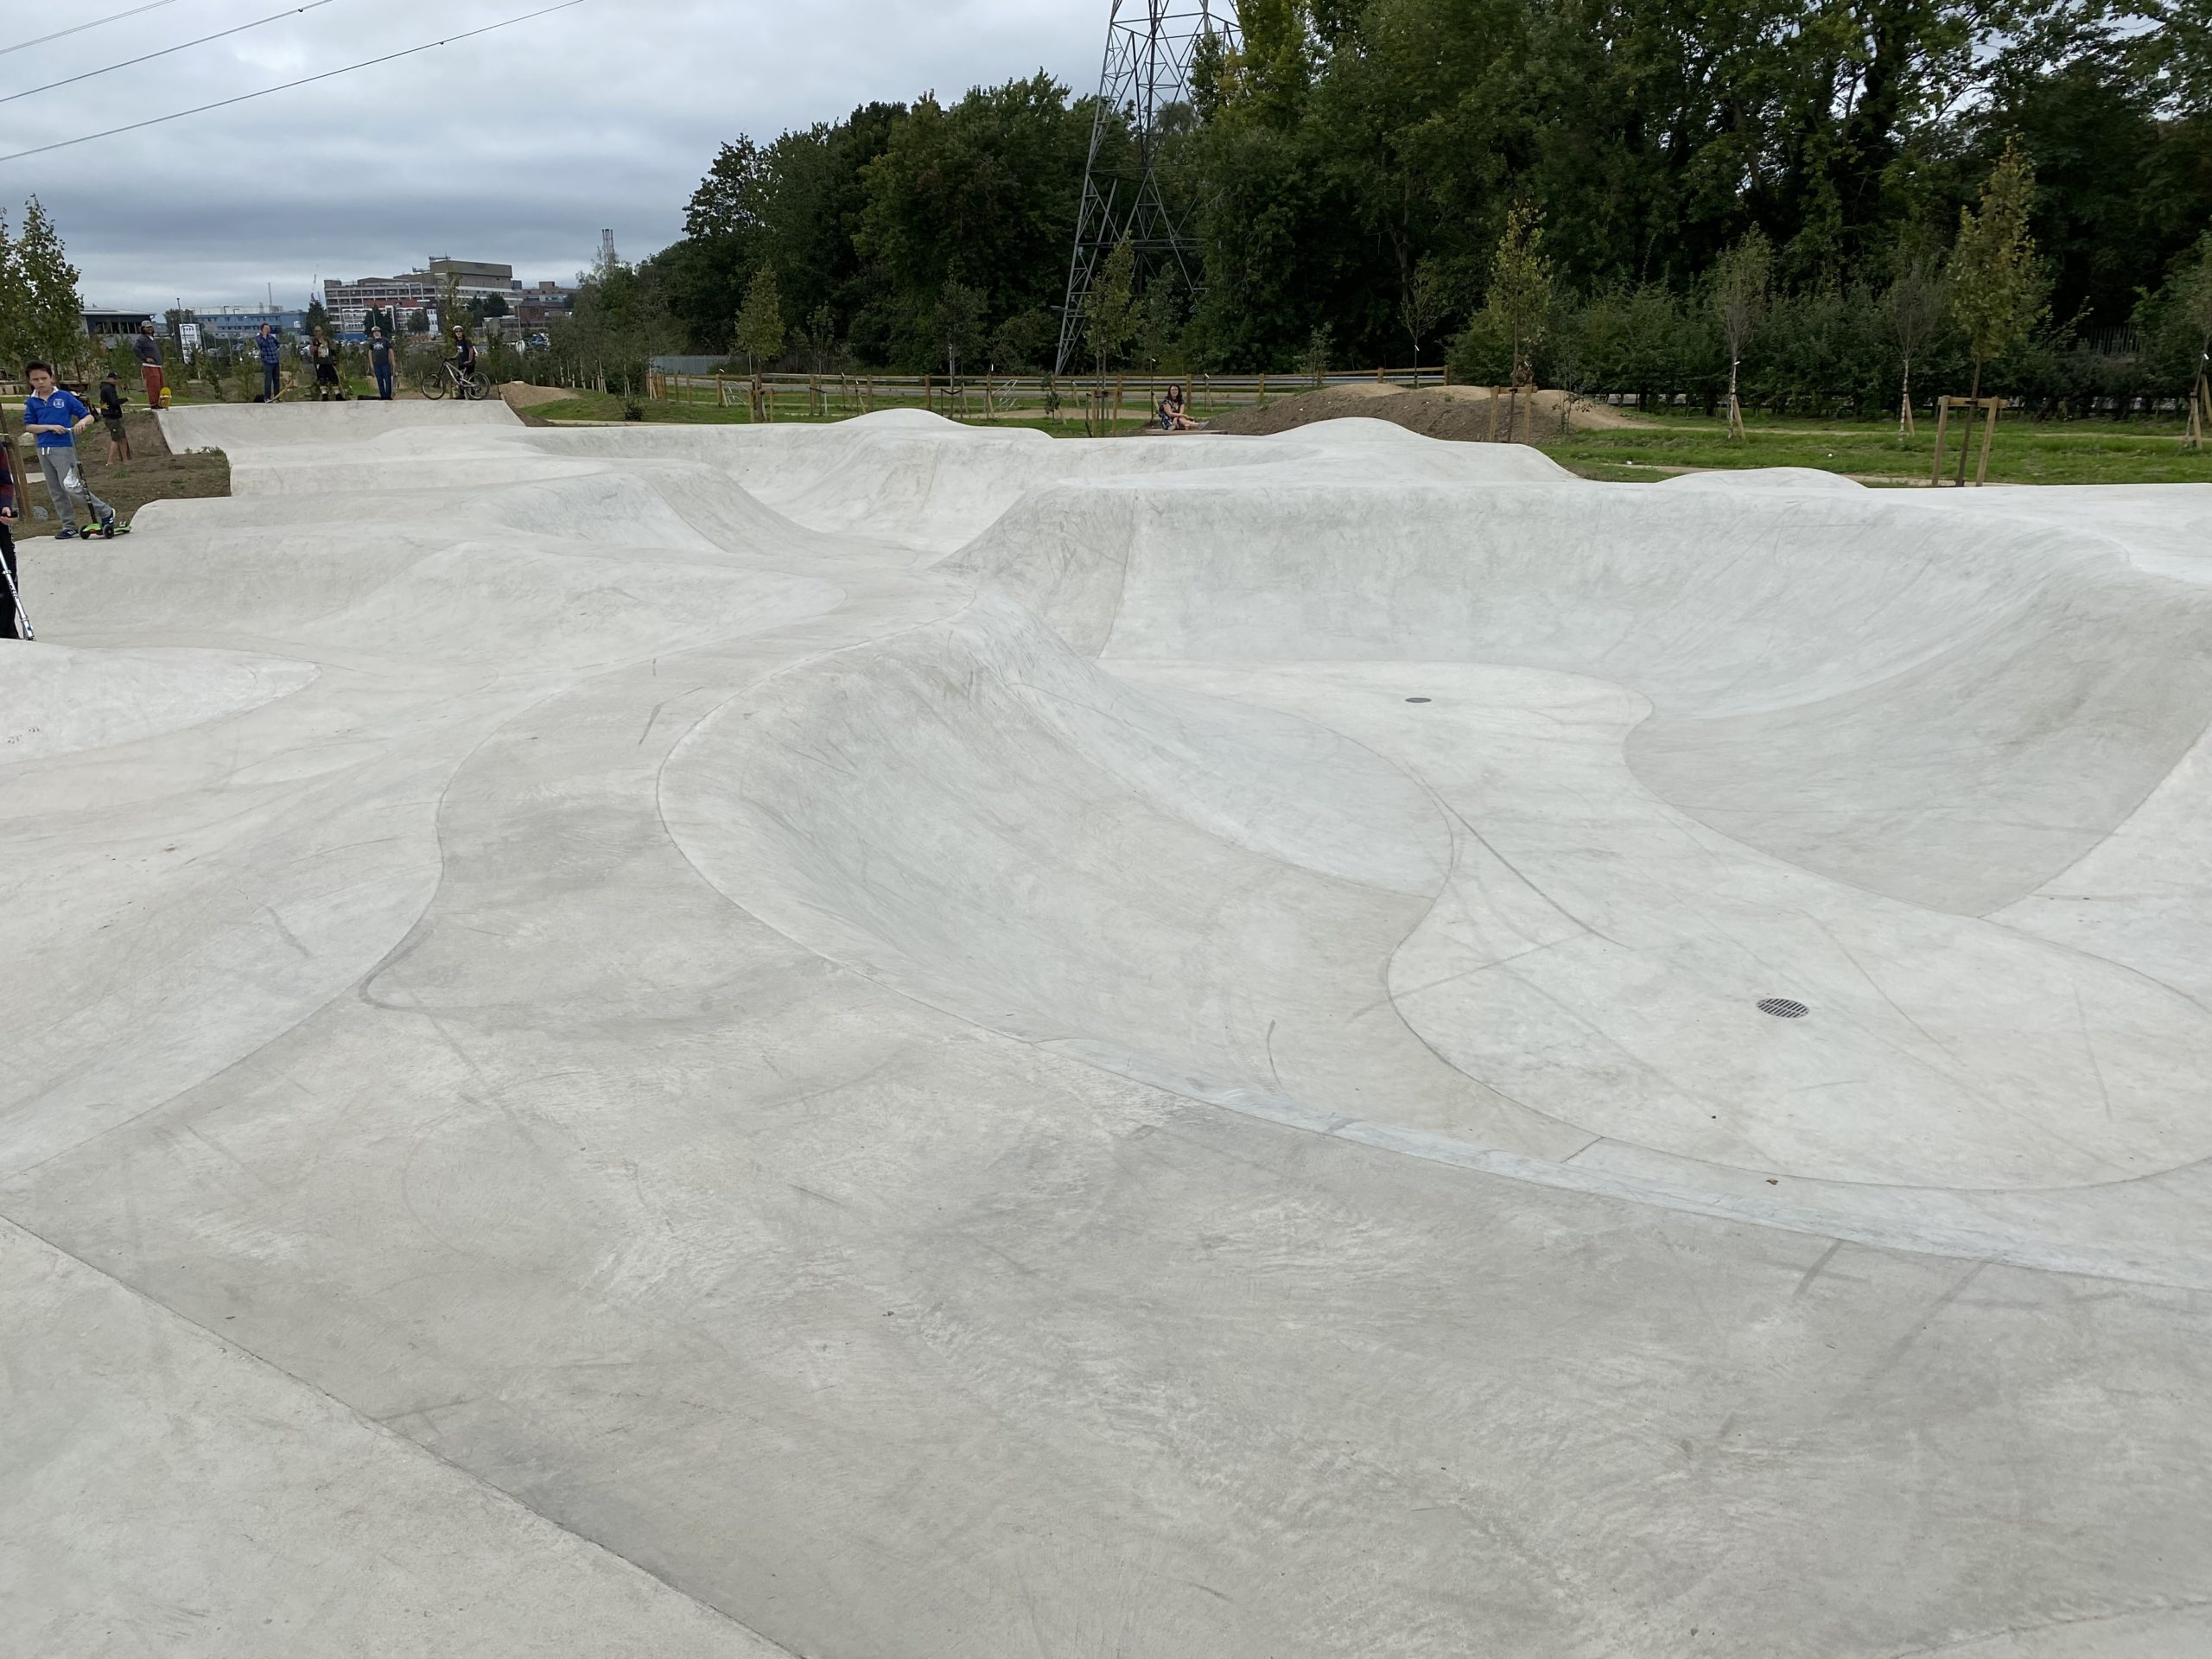 Trick Tech skateboard and Scooter coaching watford oxhey skatepark